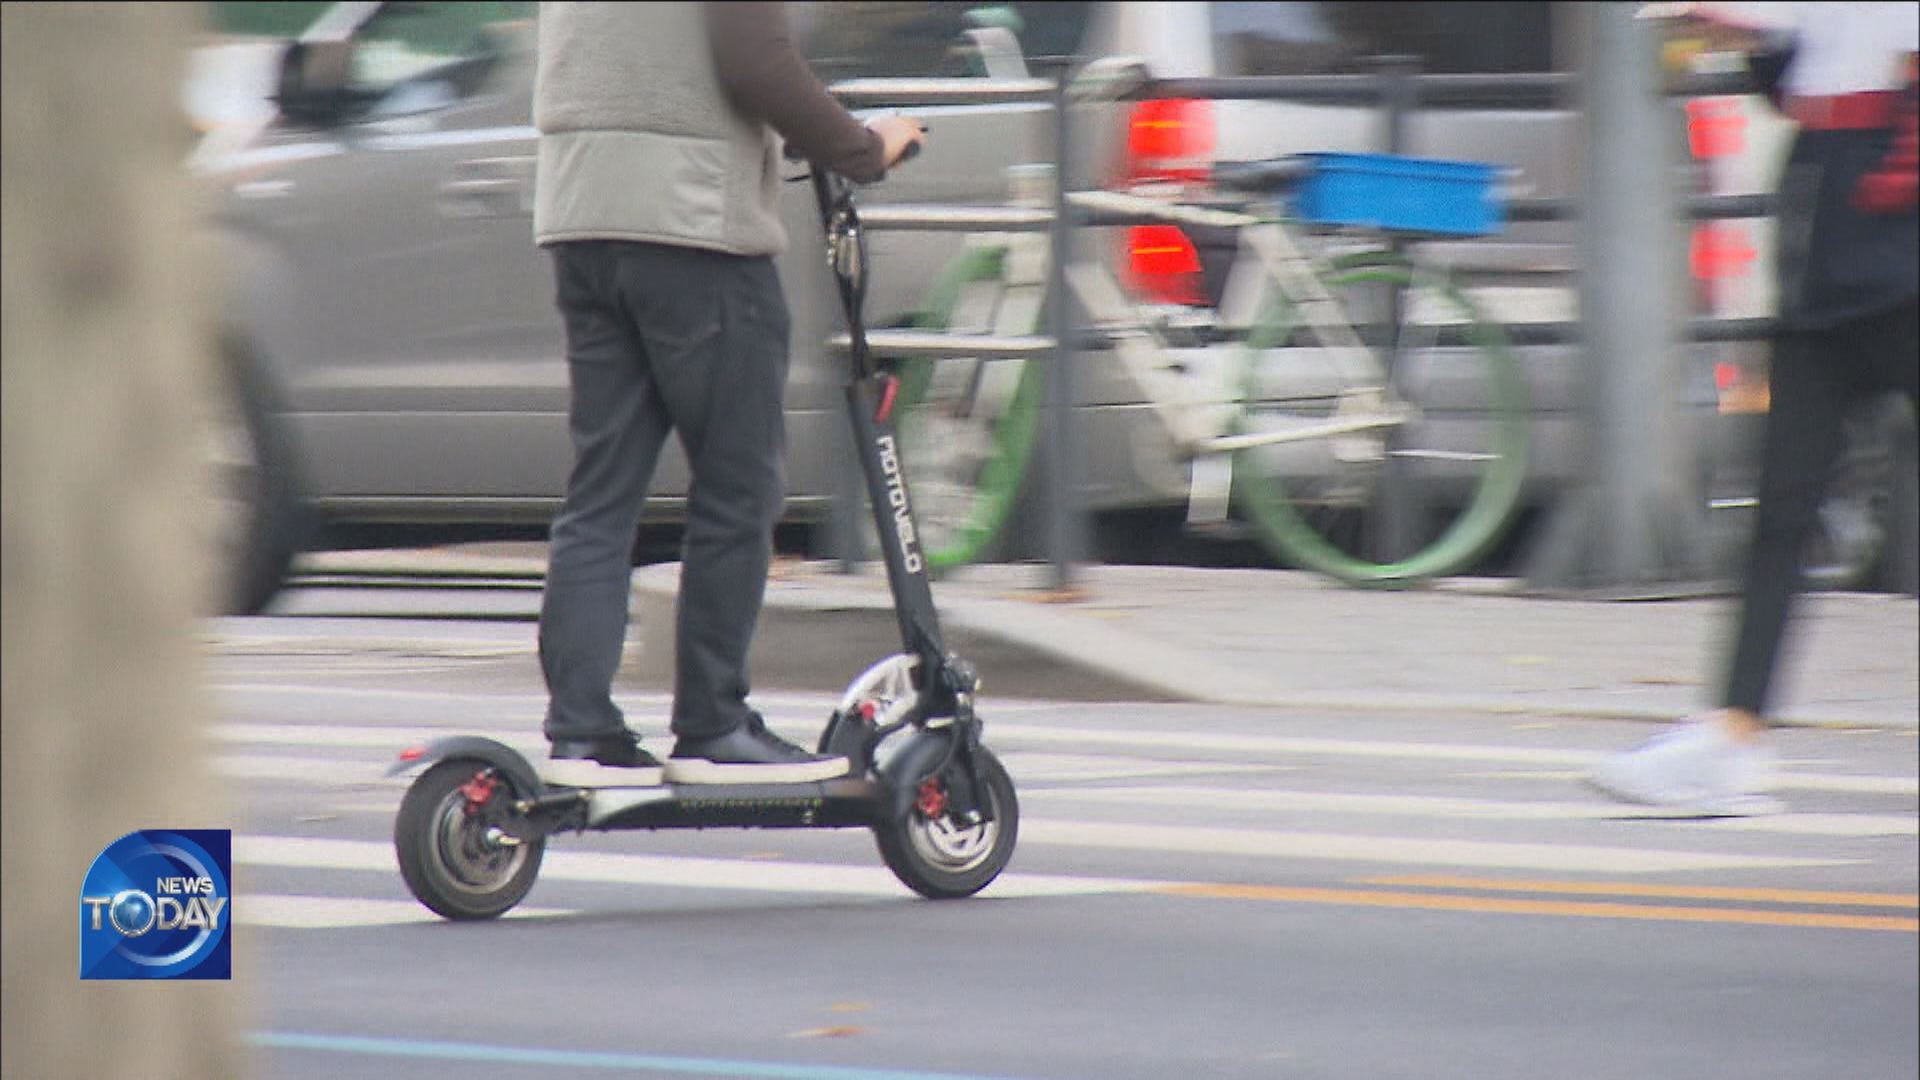 SAFETY CONCERNS OVER E-SCOOTERS